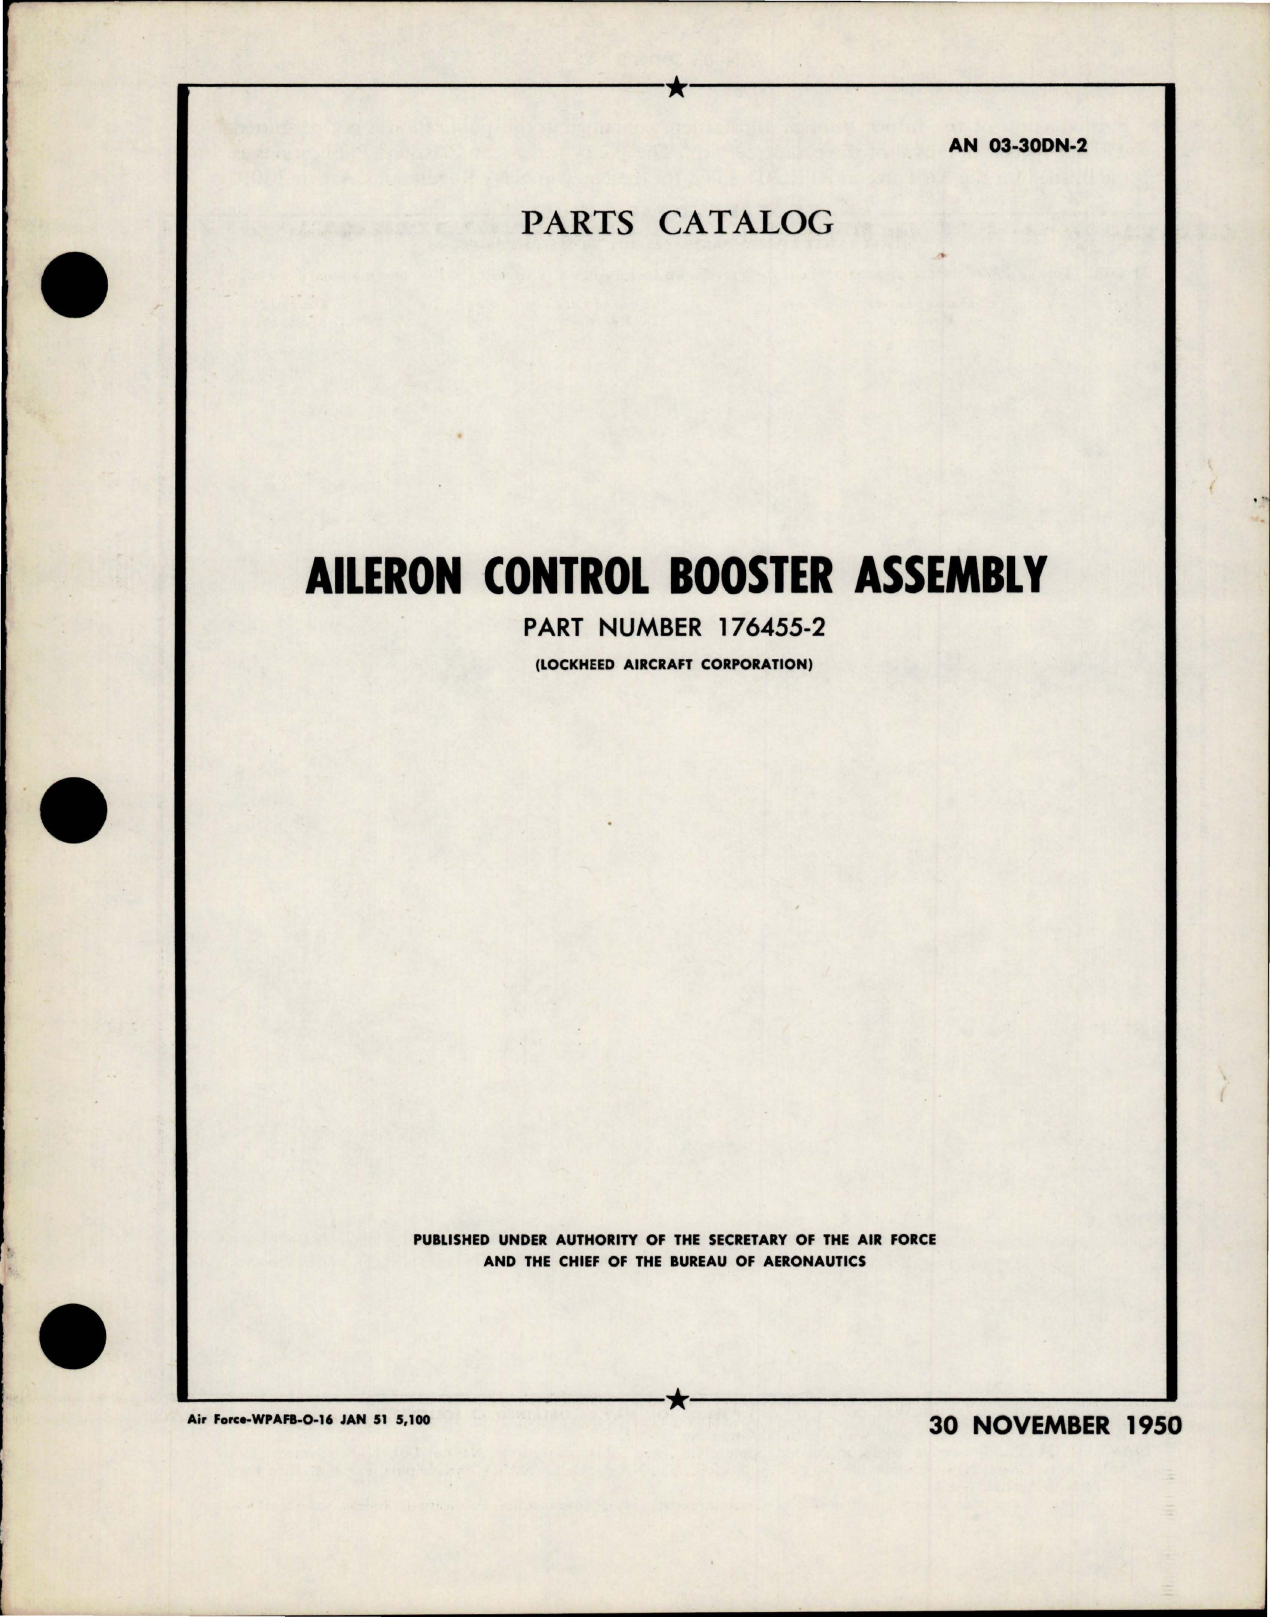 Sample page 1 from AirCorps Library document: Parts Catalog for Aileron Control Booster Assembly - Part 176455-2 